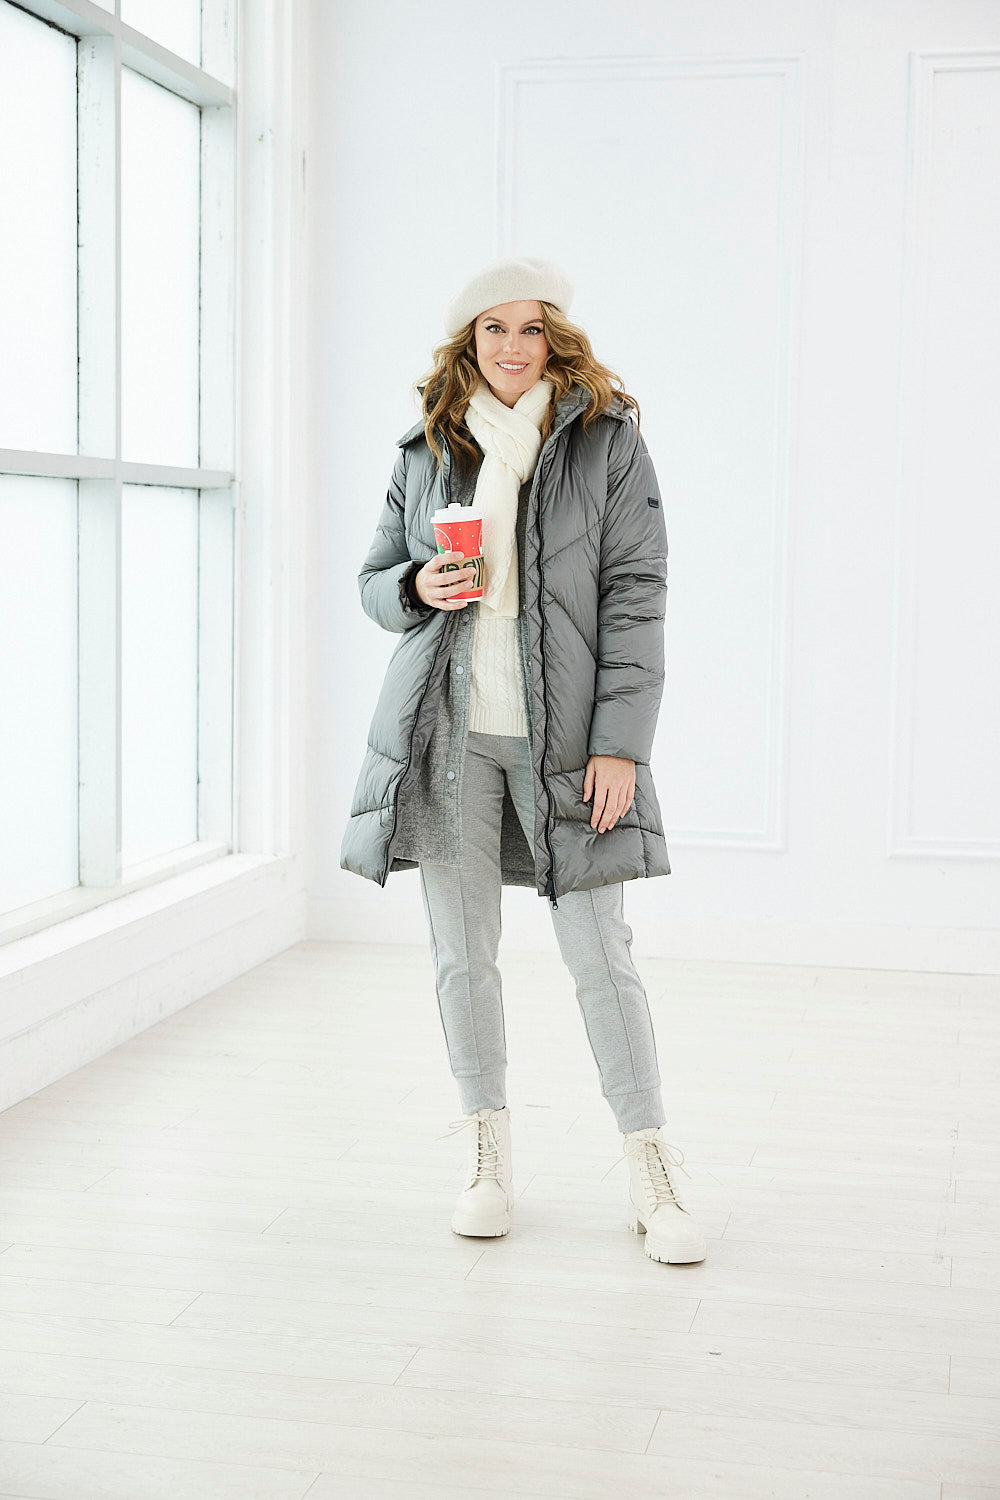 Clothing for Women - Down Jackets, Coats & Dresses